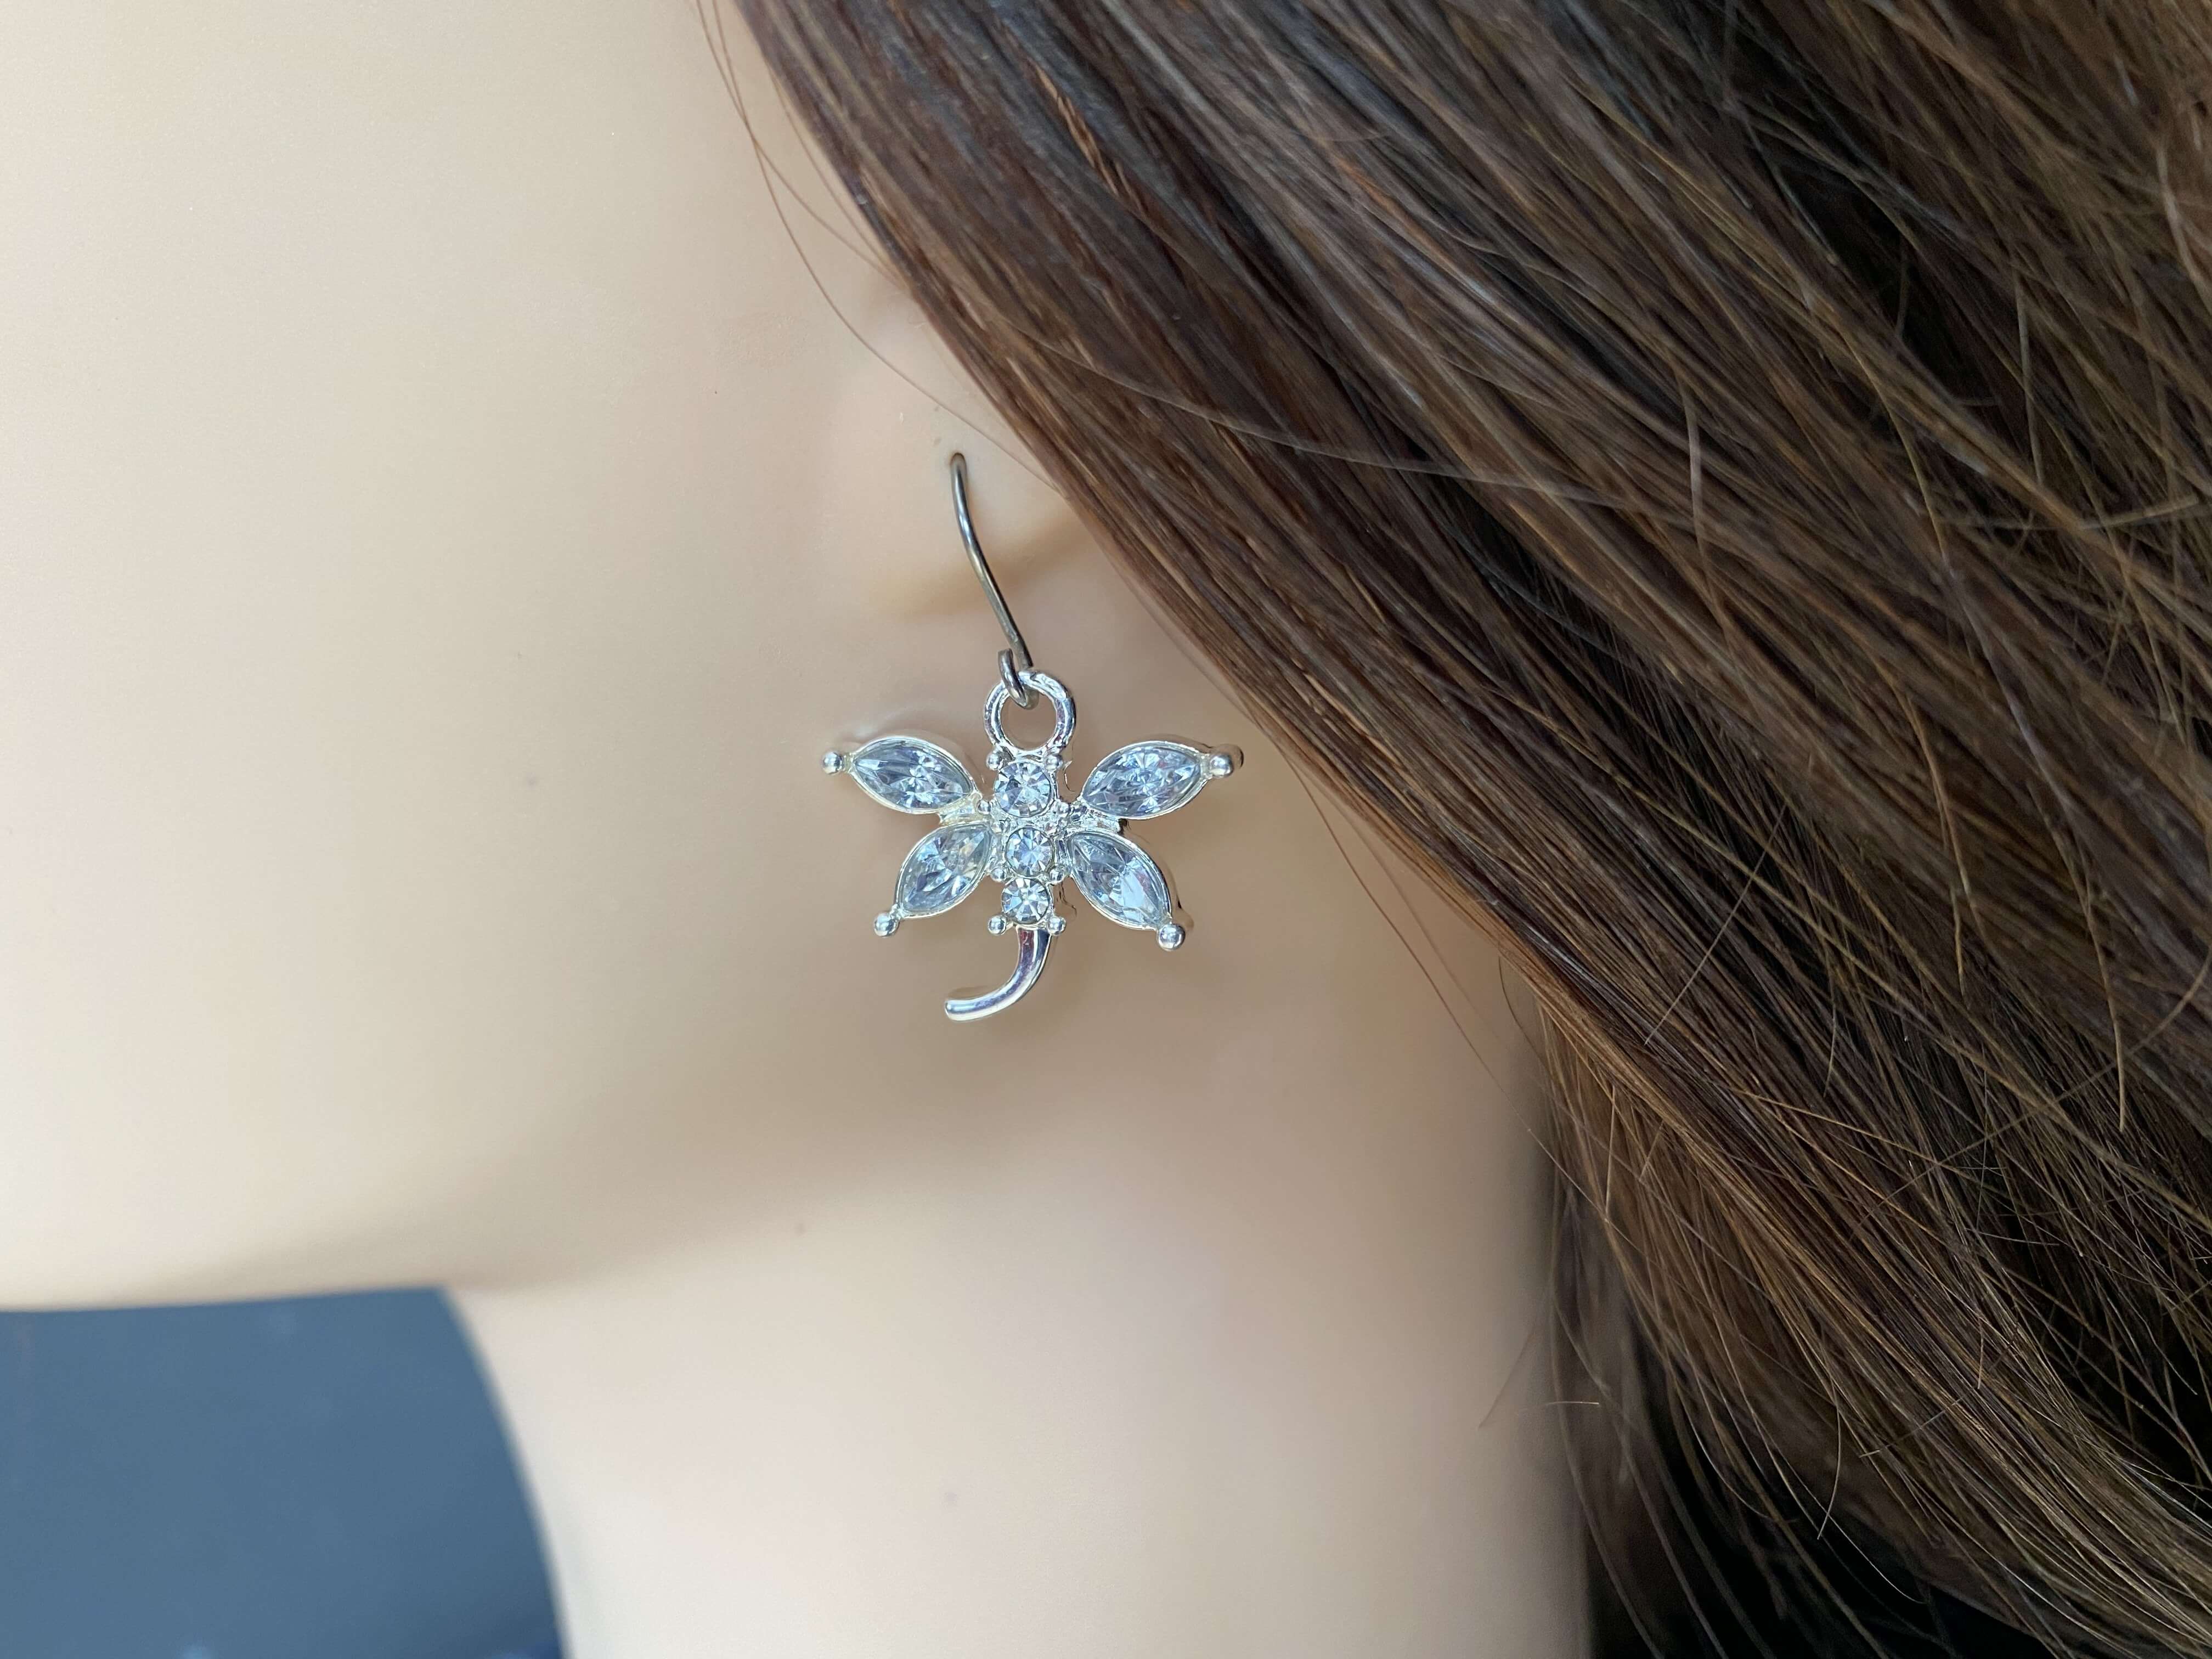 Bejewelled Dragonfly clear on ear